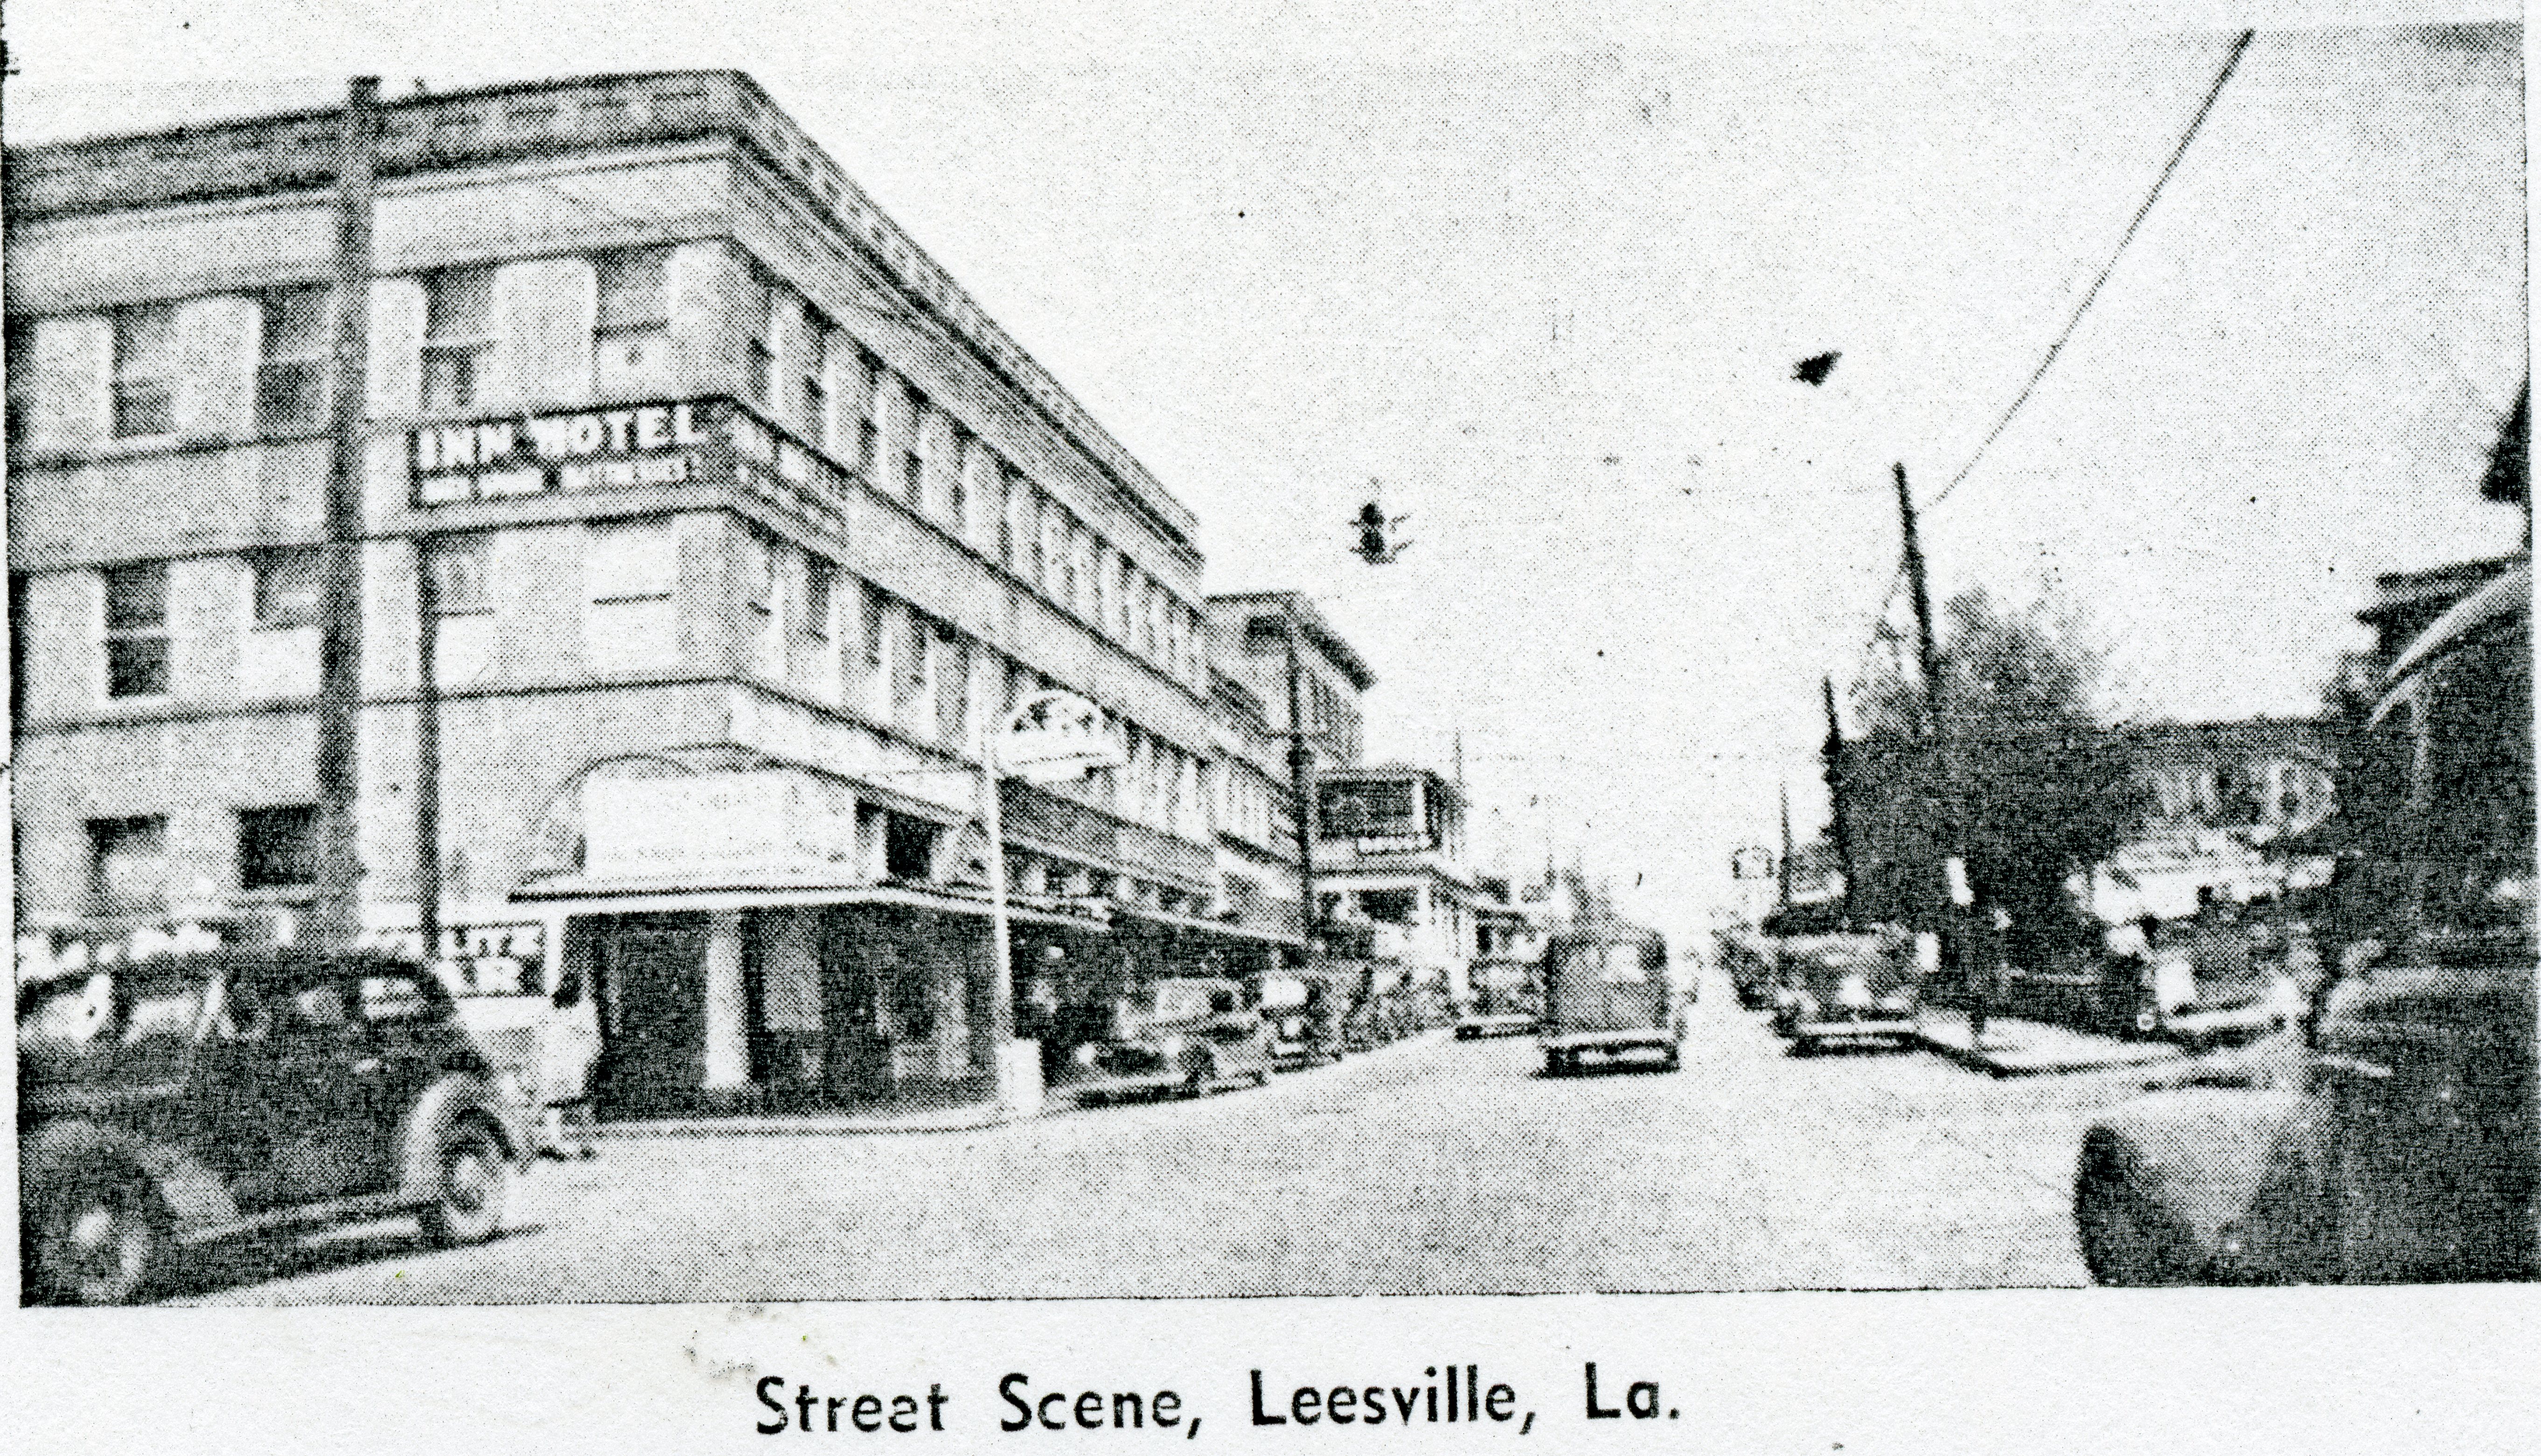 Photos from a 1940s informational guide promoting Leesville, Louisiana – All Things Sabine